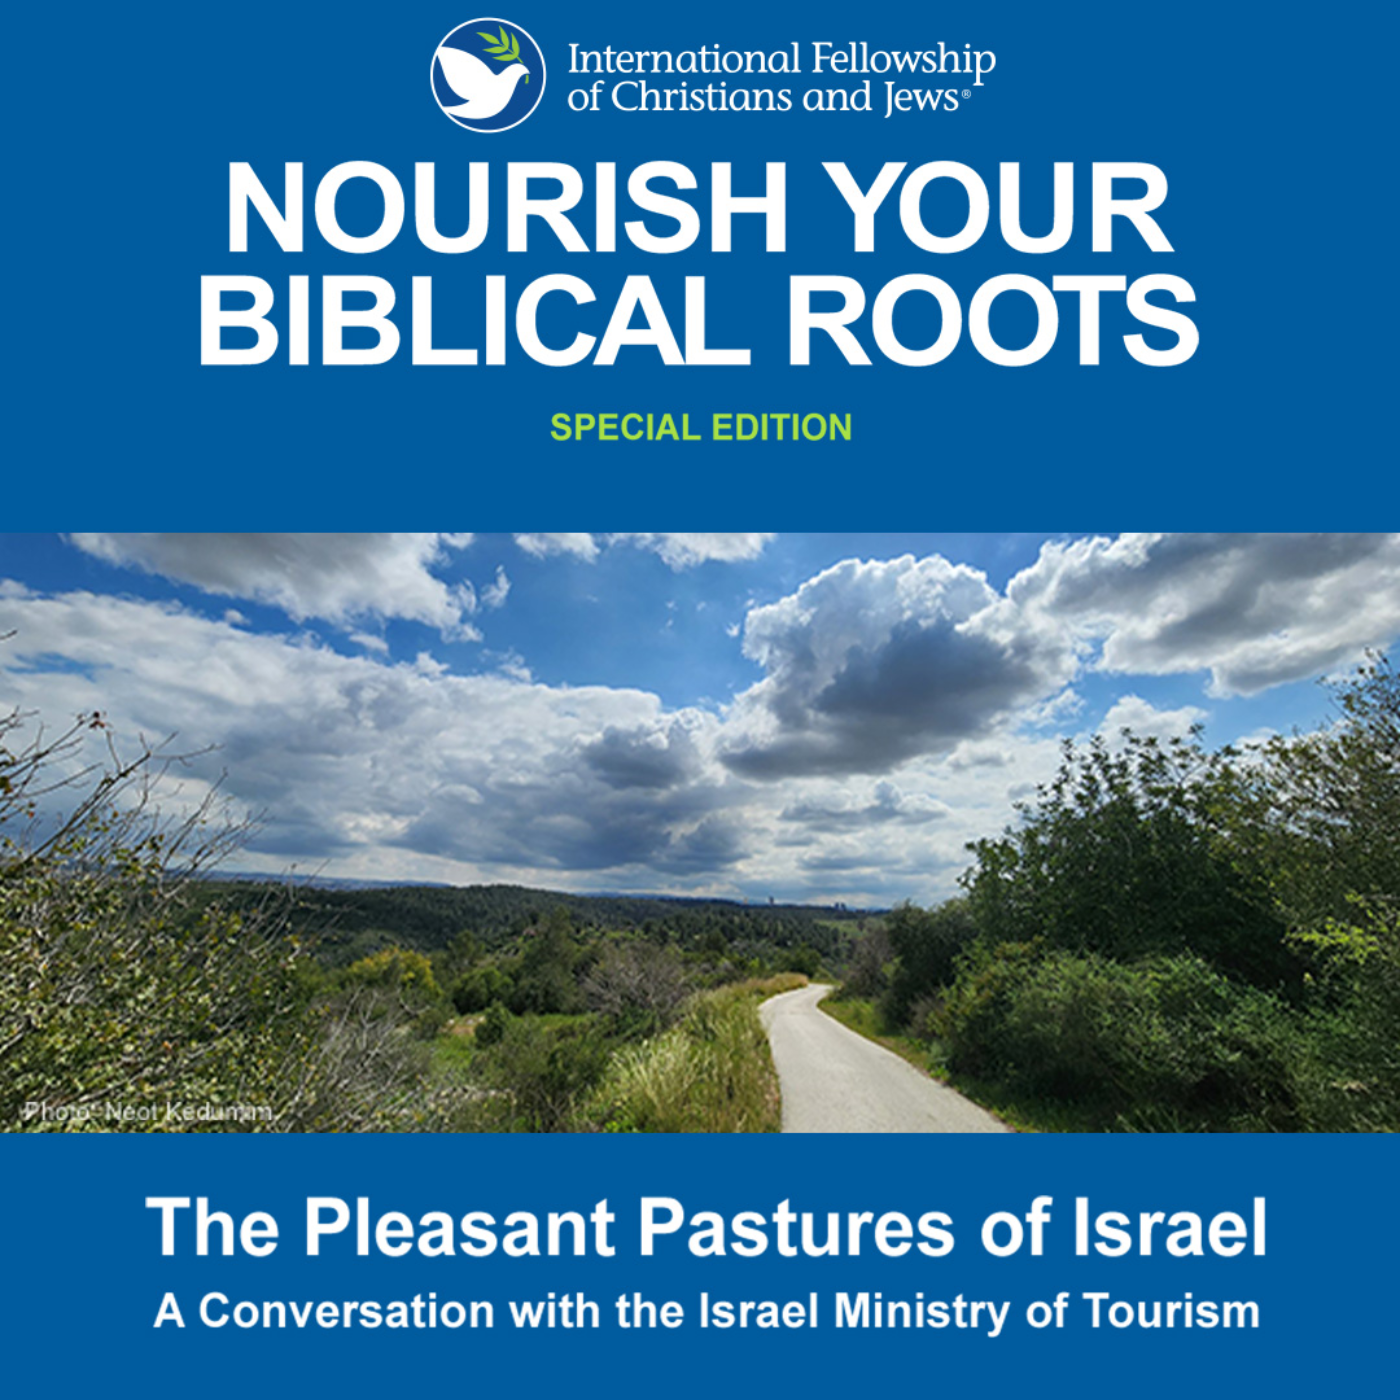 The Pleasant Pastures of Israel